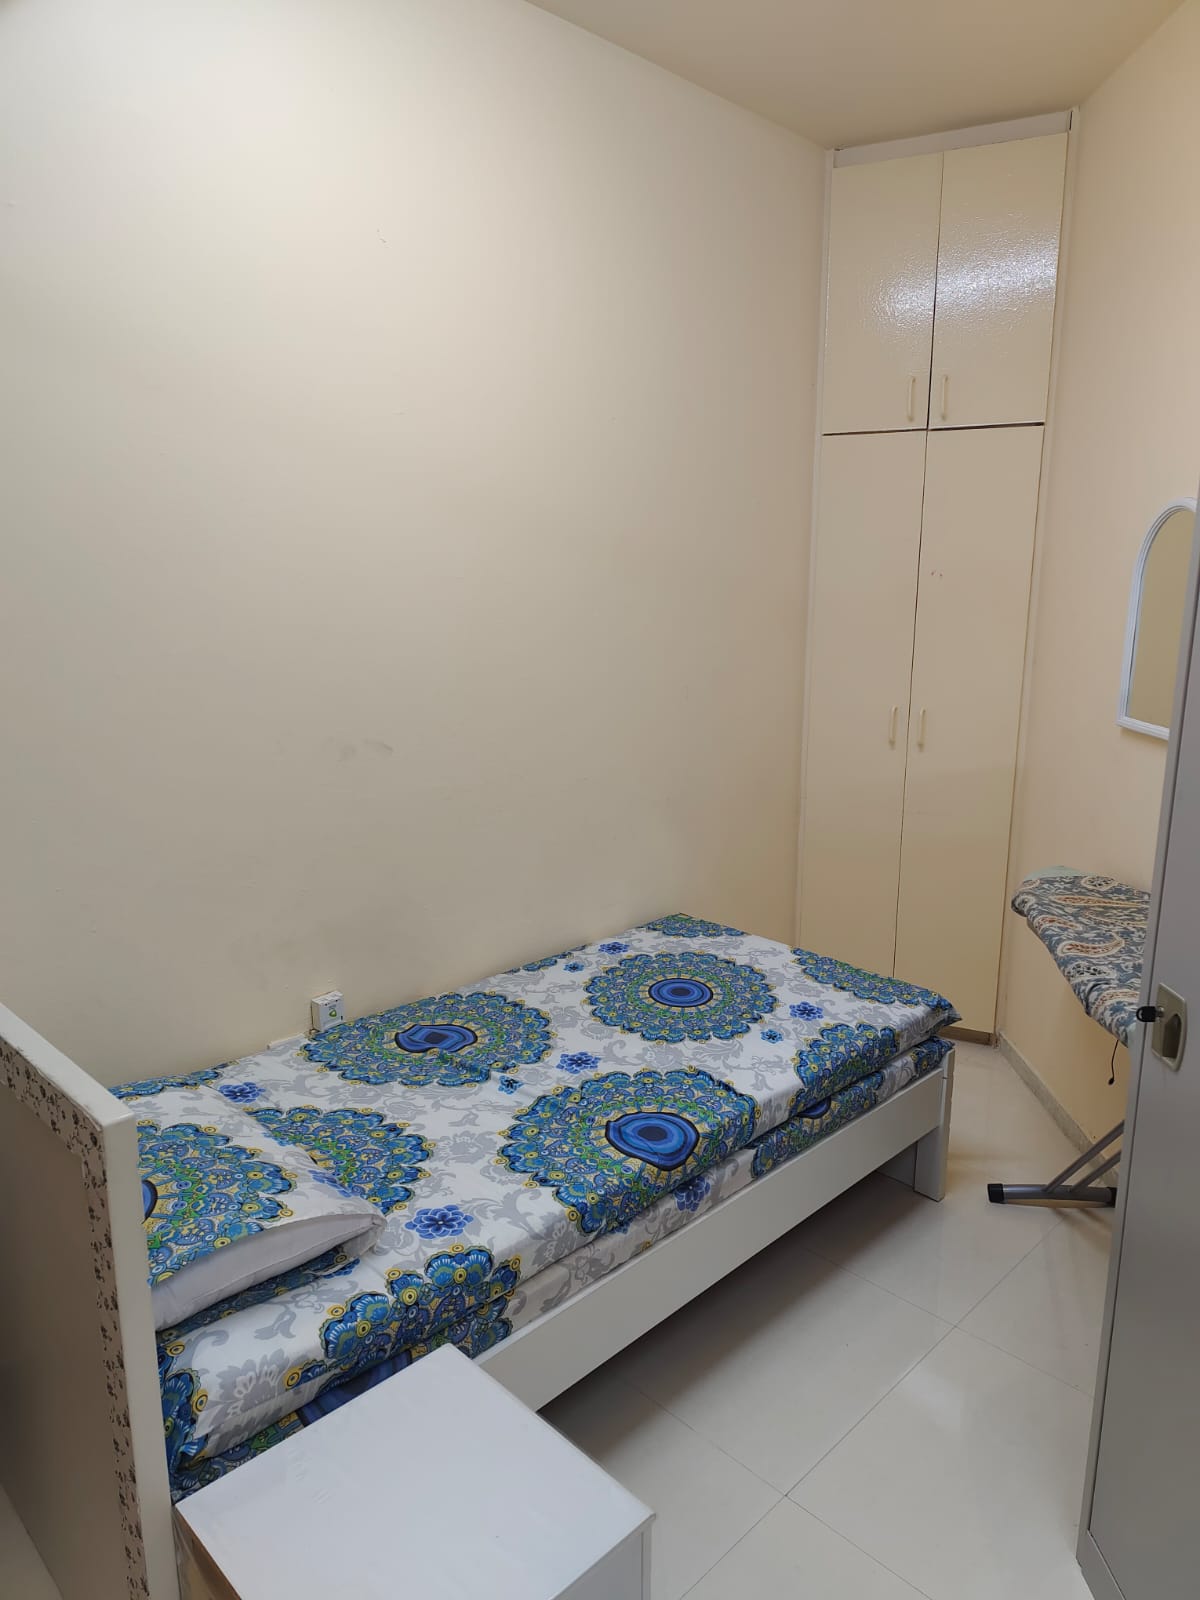 2500 Per Month Including Dewa And Wifi Fully Furnished Room Available In Karama